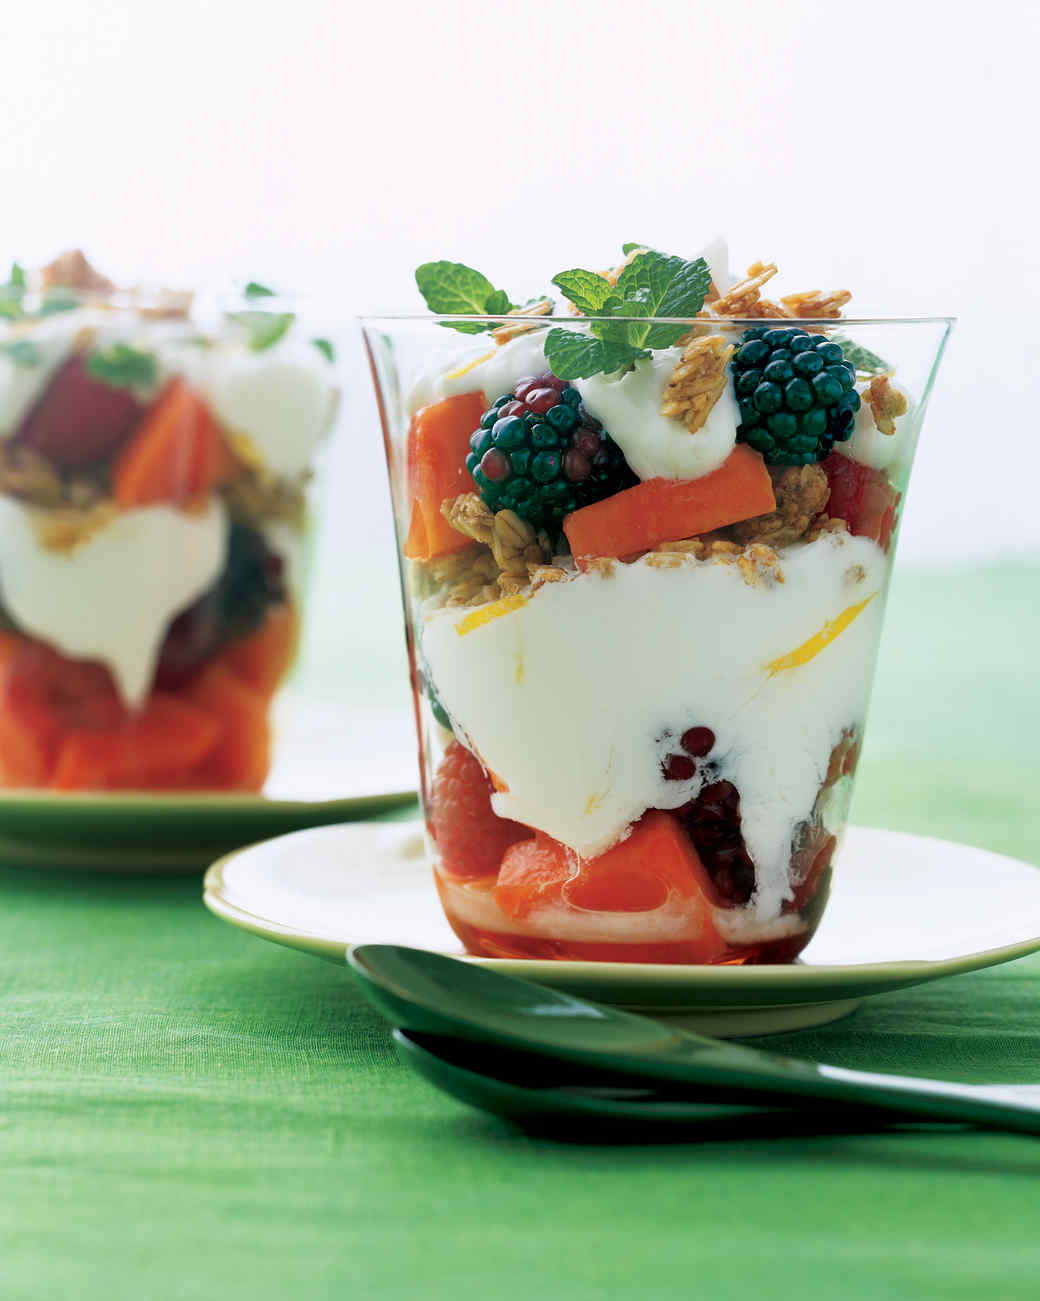 Satisfy Your Sweet Tooth with Guilt-Free and Delicious Healthy Desserts!